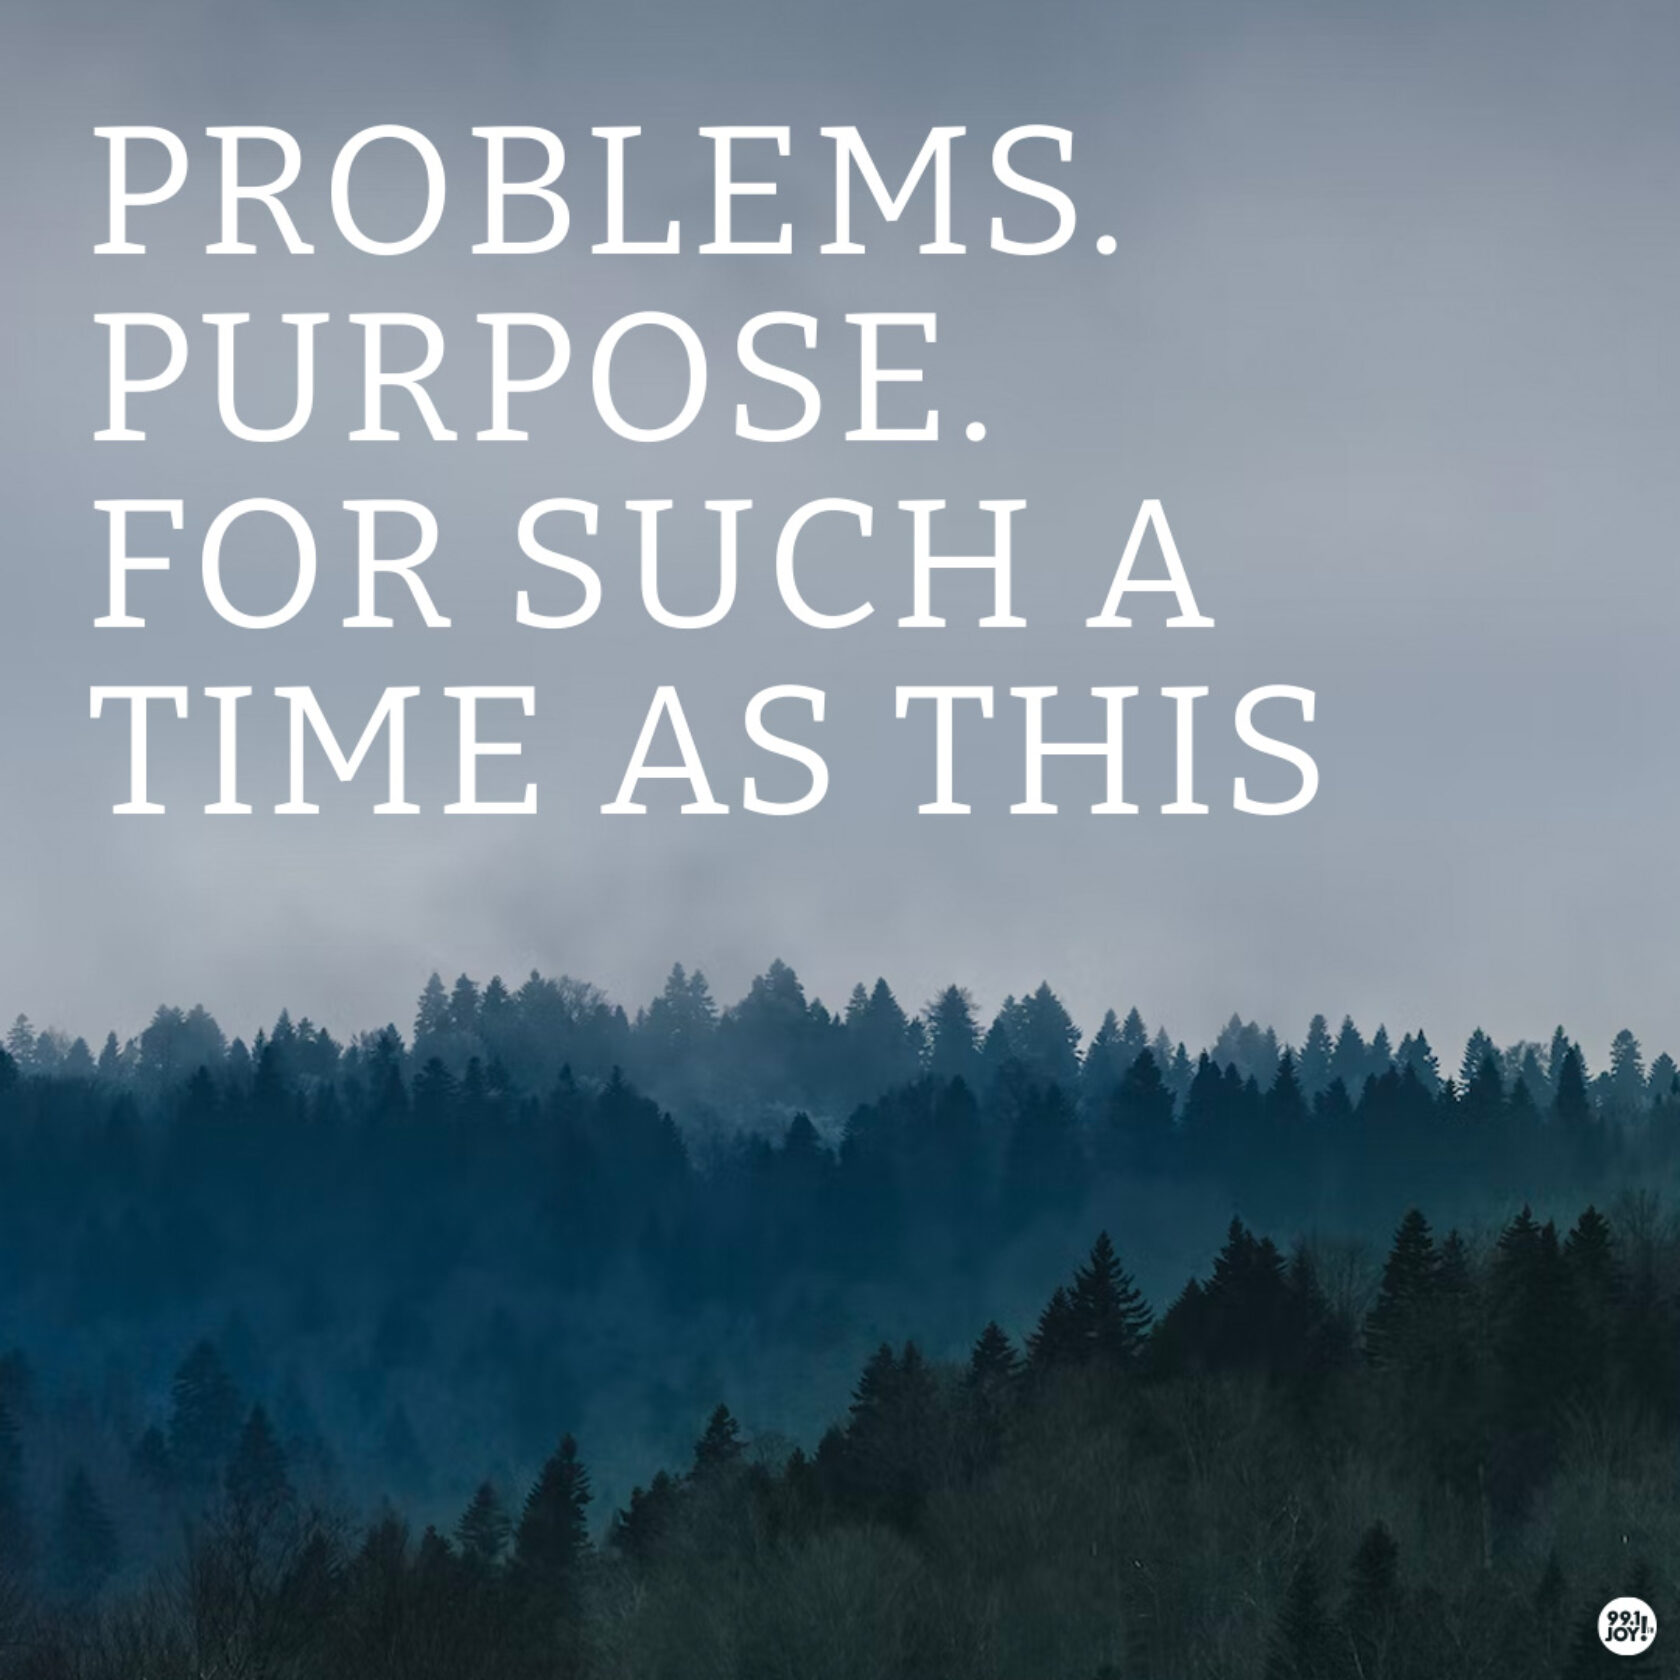 Problems. Purpose. For such a time as this